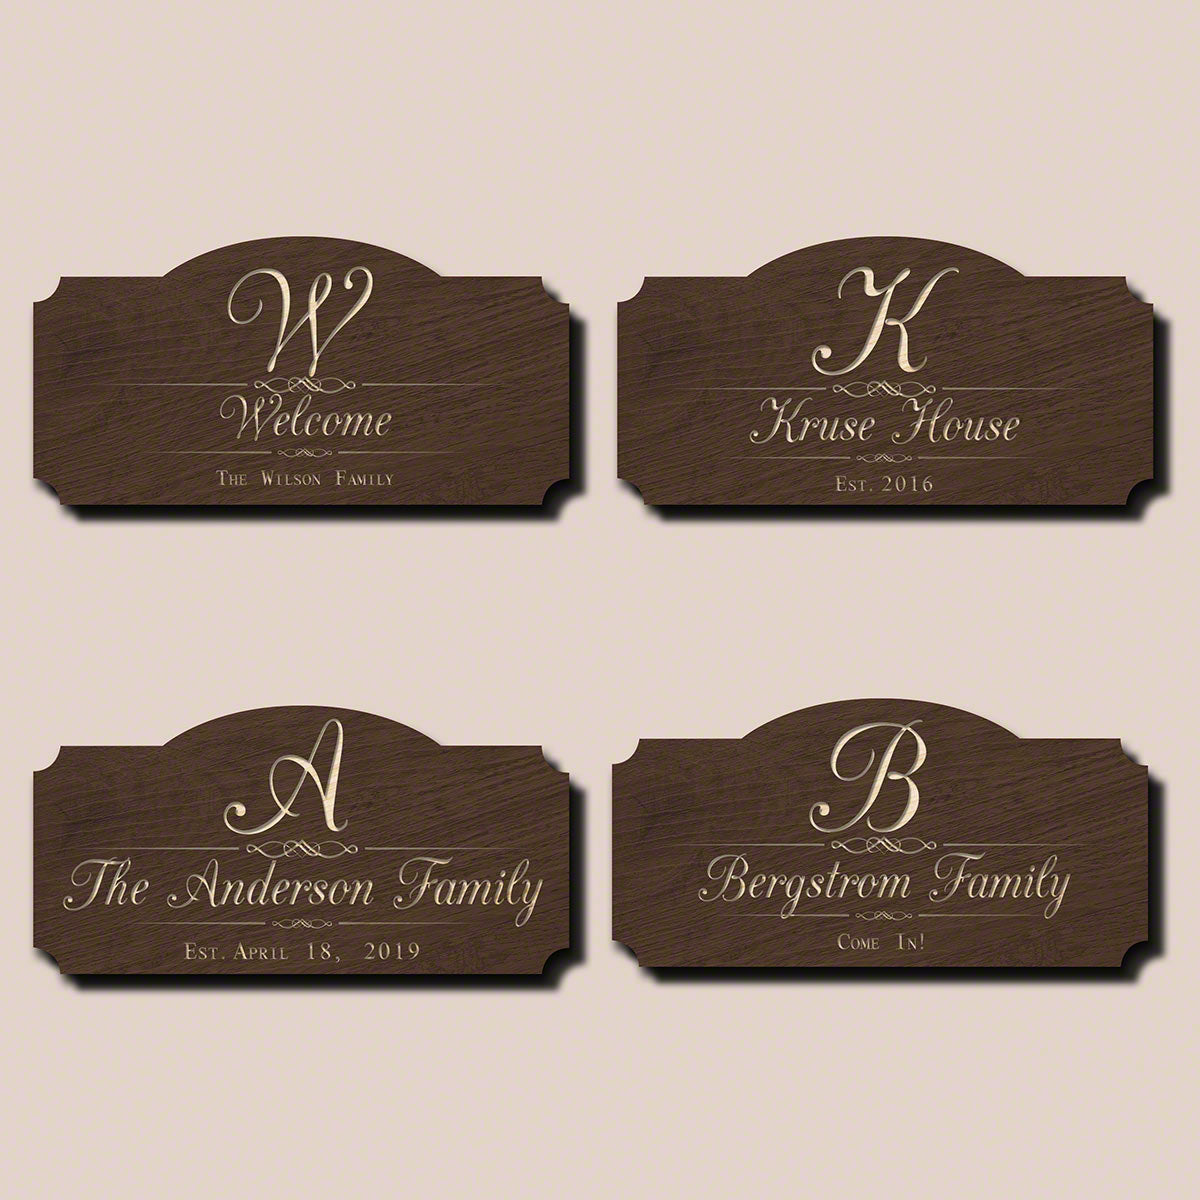 Mulheren Personalized Family Name Sign (Signature Series)